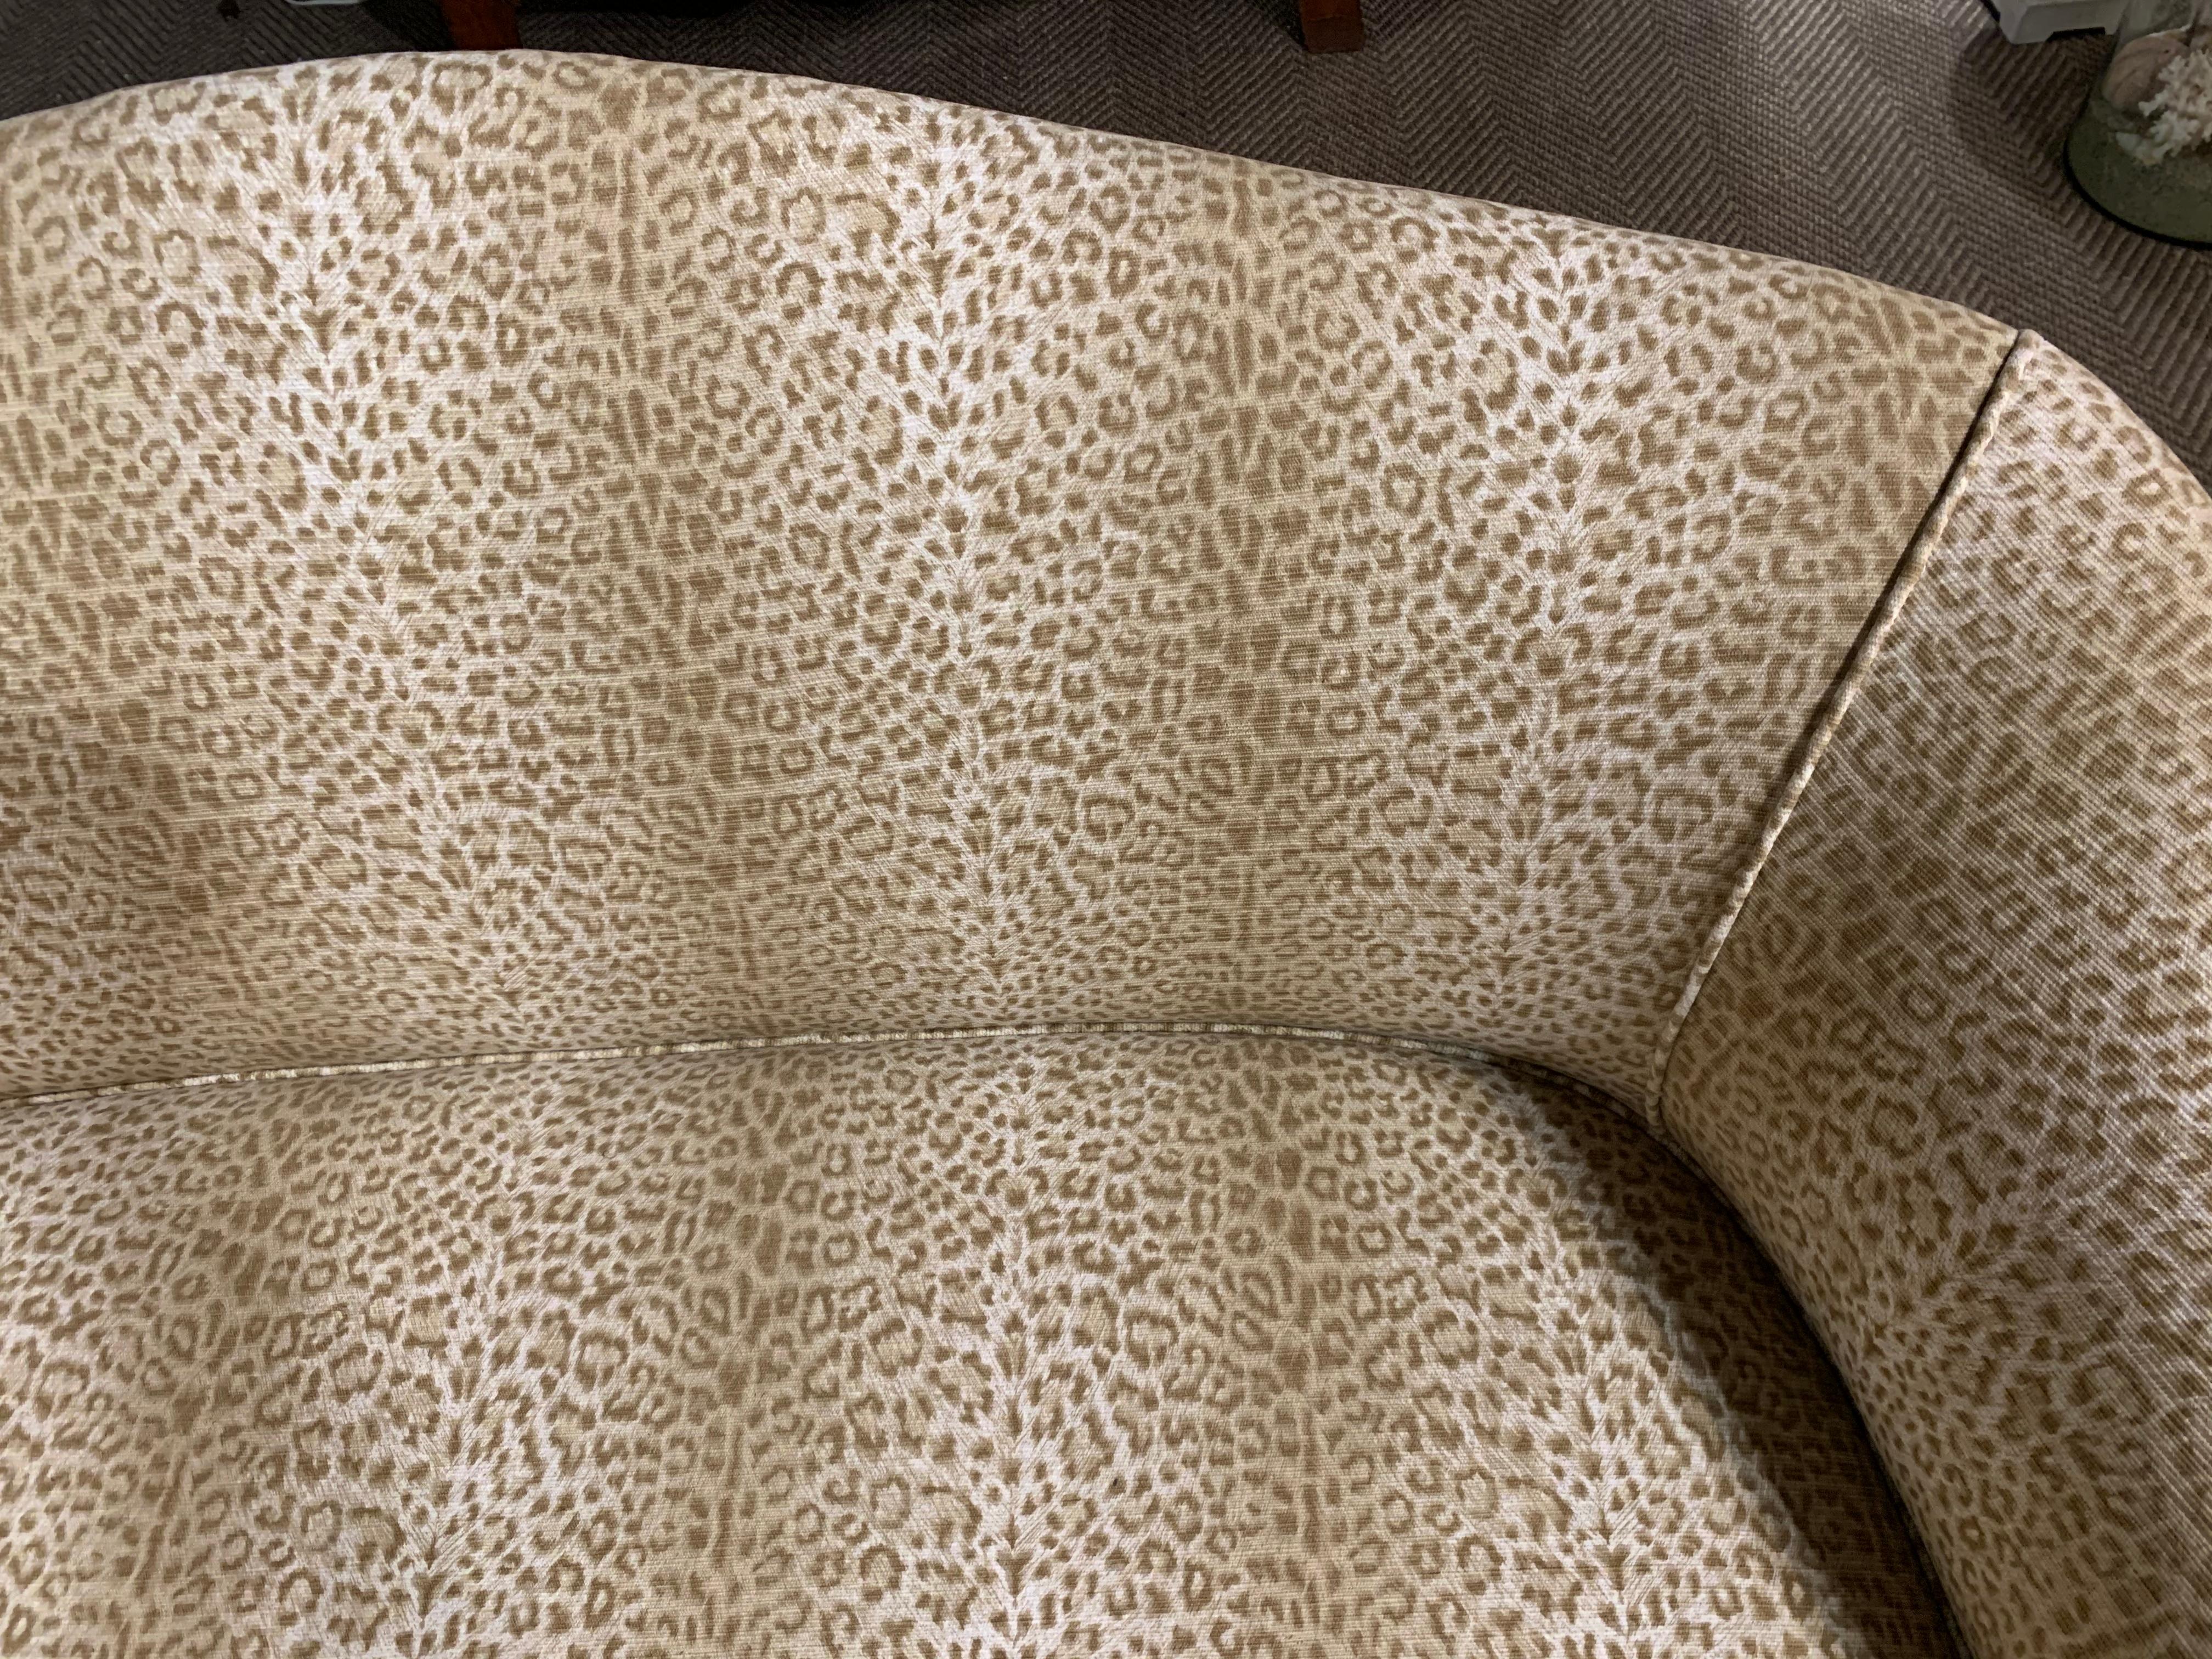 A sophisticated curvy tailored sofa having mahogany frame, carved wood on the legs, and fabulous neutral and understated animal print upholstery.

Note: A pair is available.